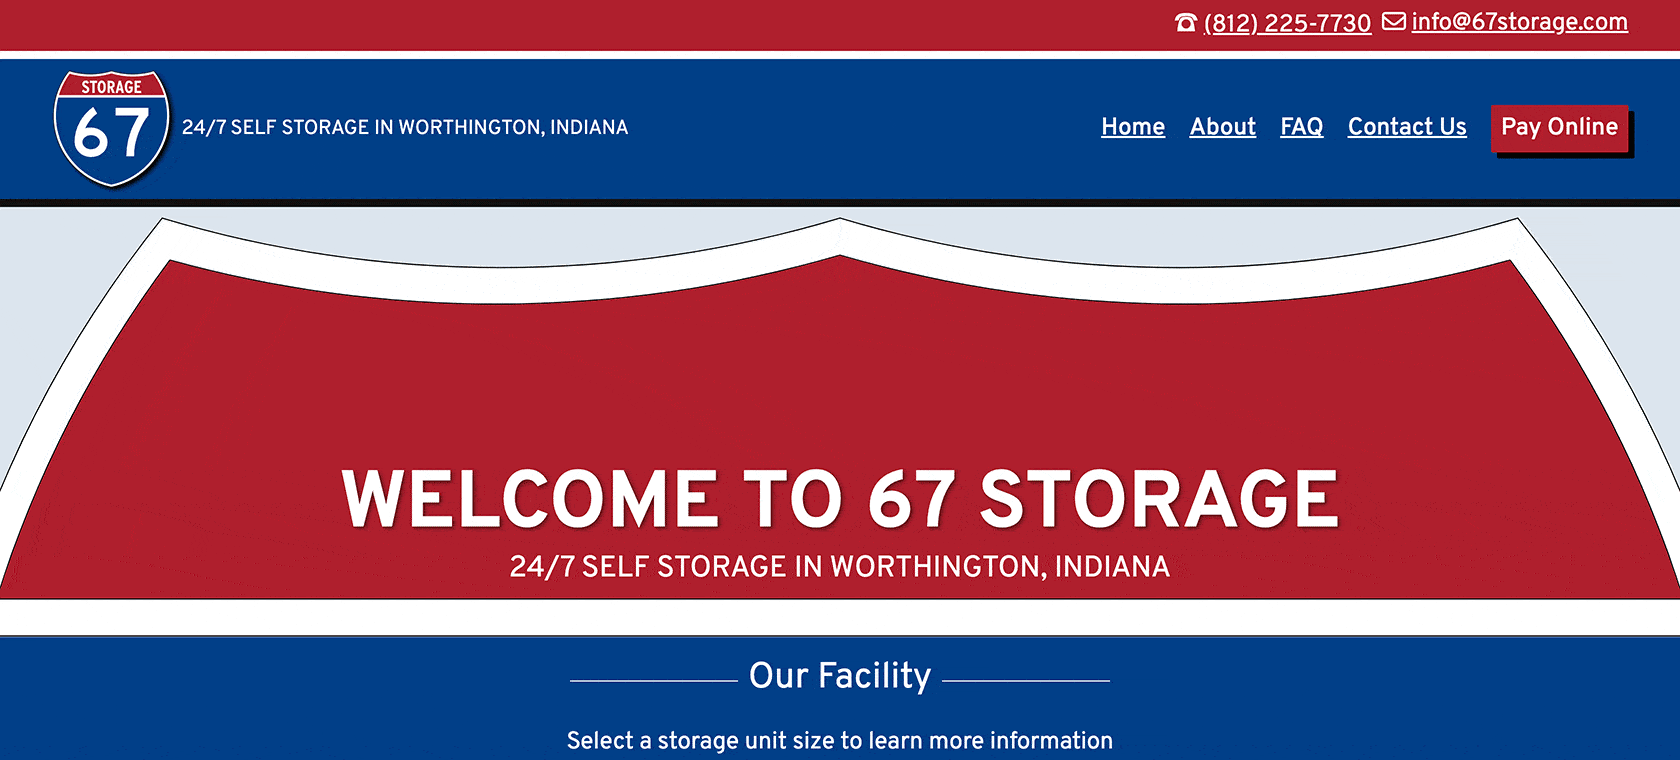 Header of the 67 Storage website displaying the company logo with contact details and navigation menu, with a welcoming message against a red background.